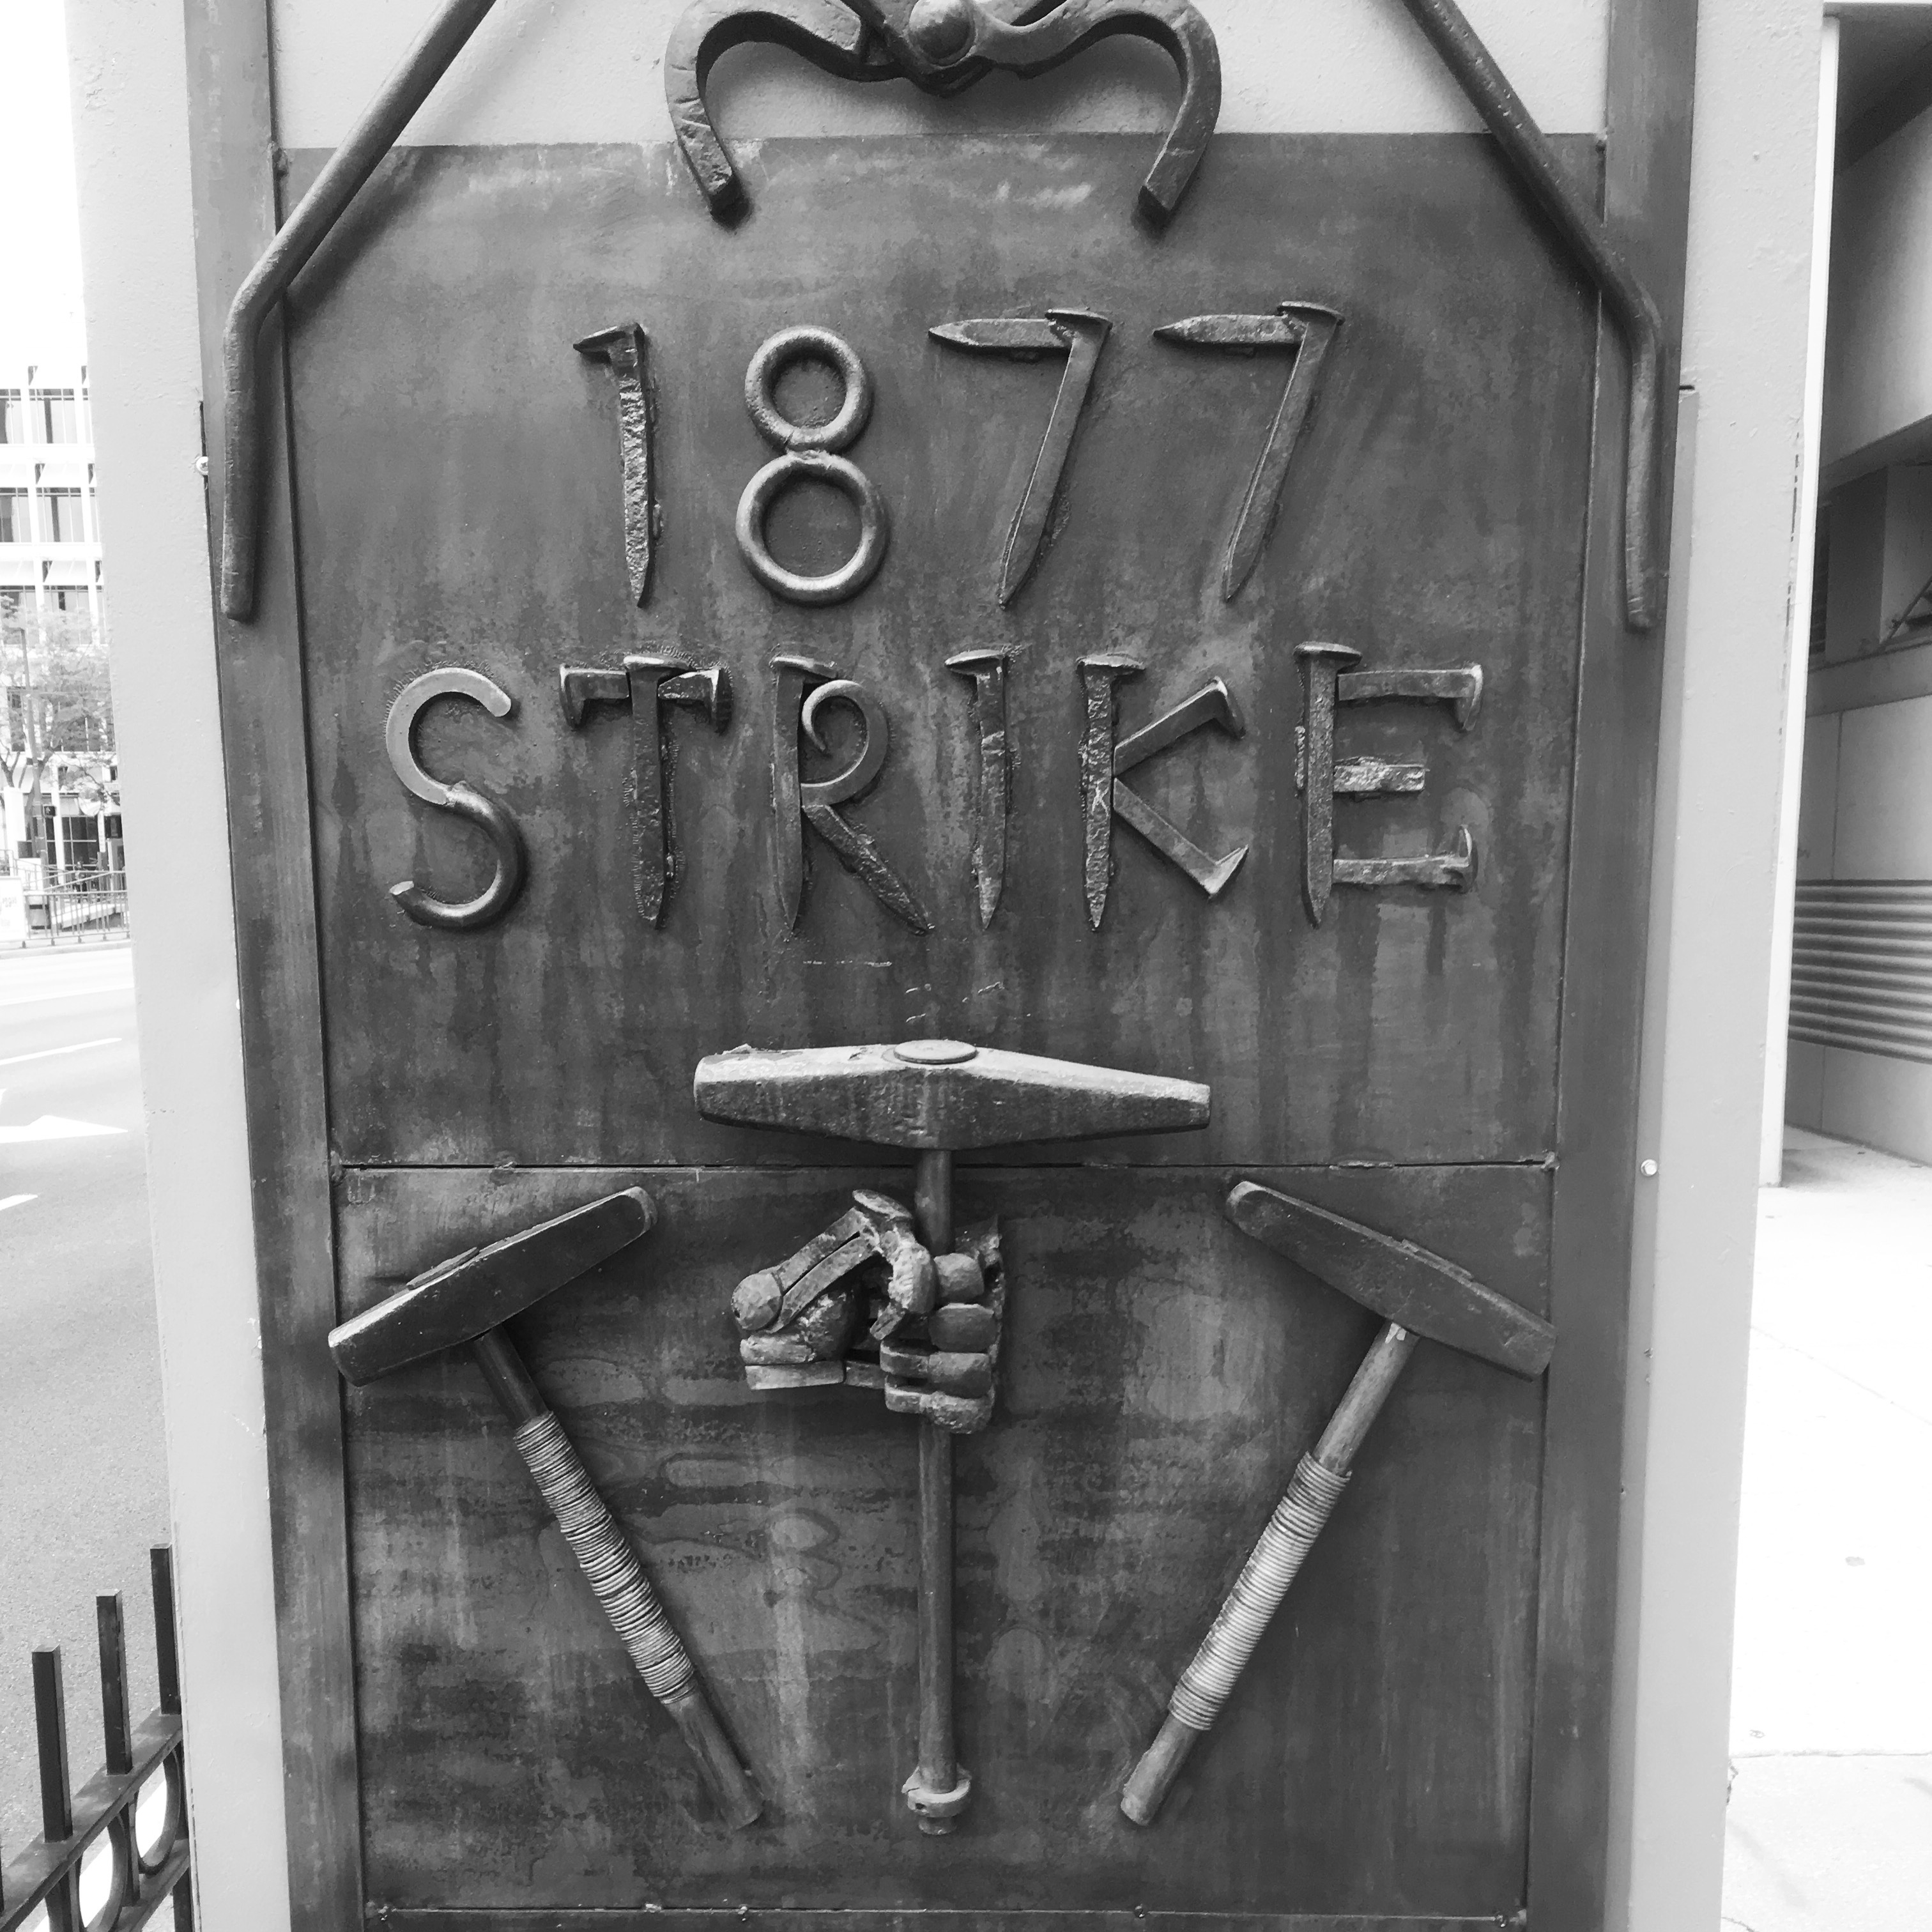 Artwork celebrating the 1877 rail strike on a bus stop near the convention center